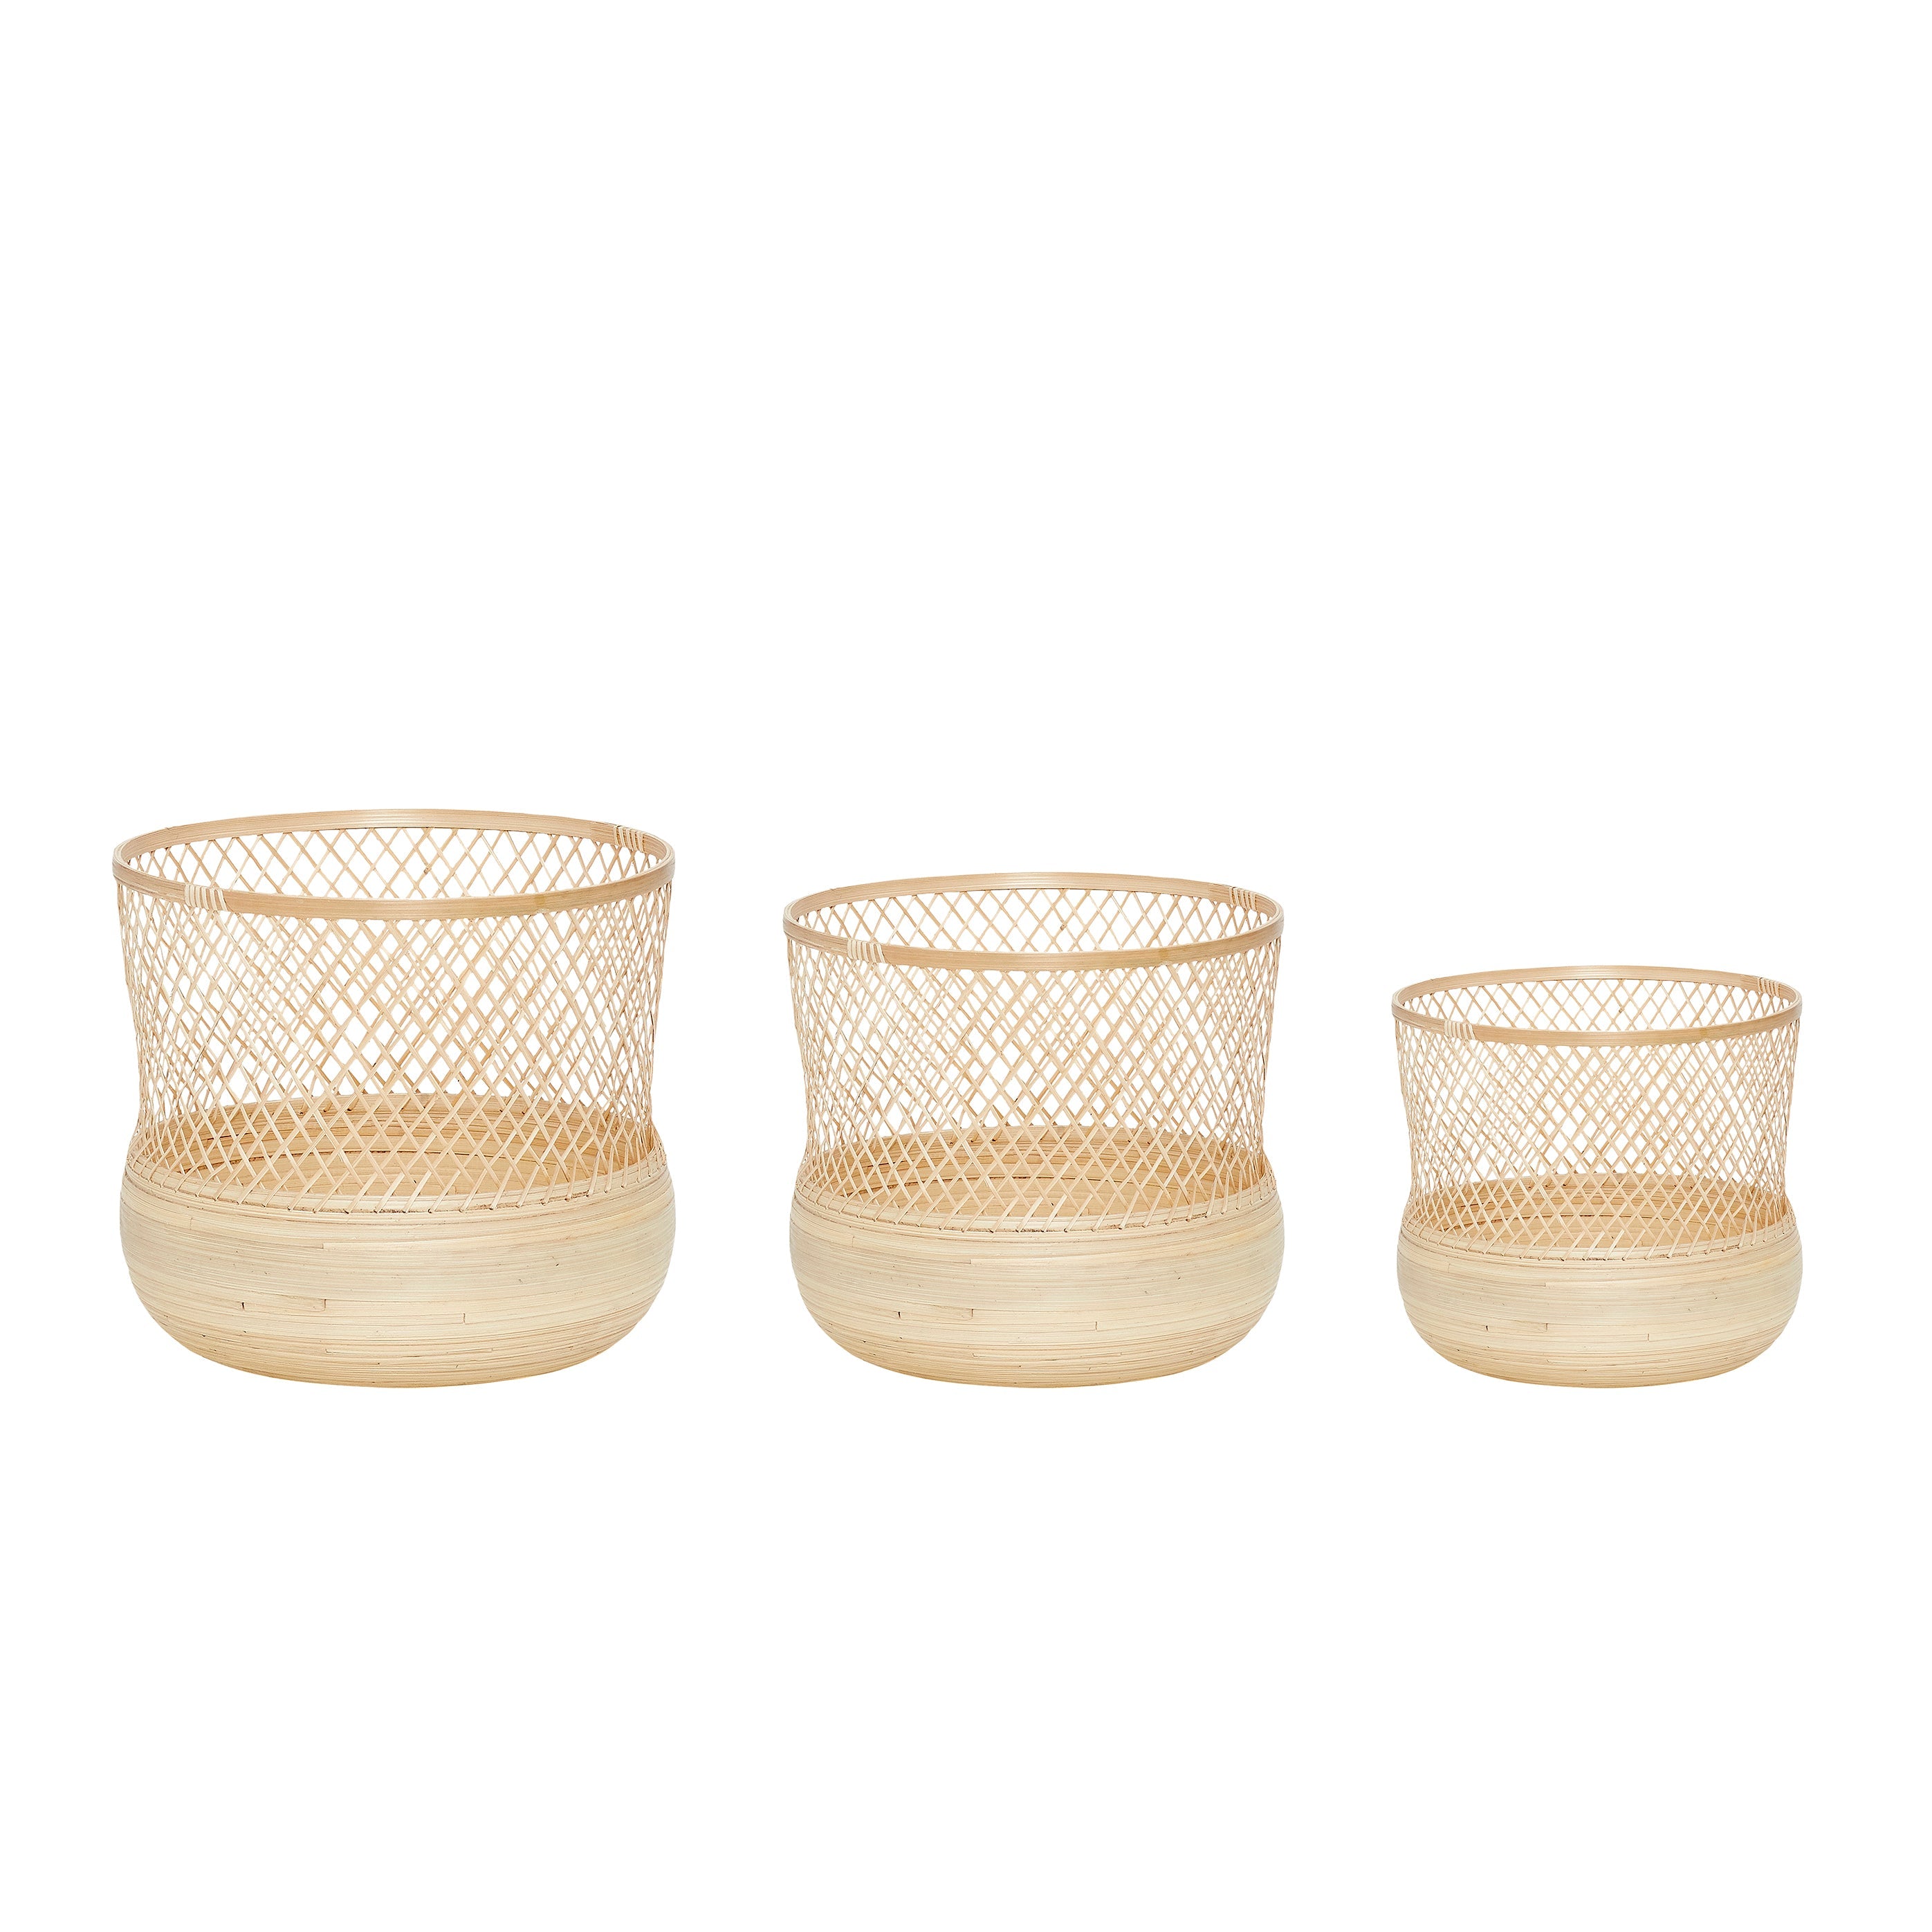 Round Bamboo Baskets in Small